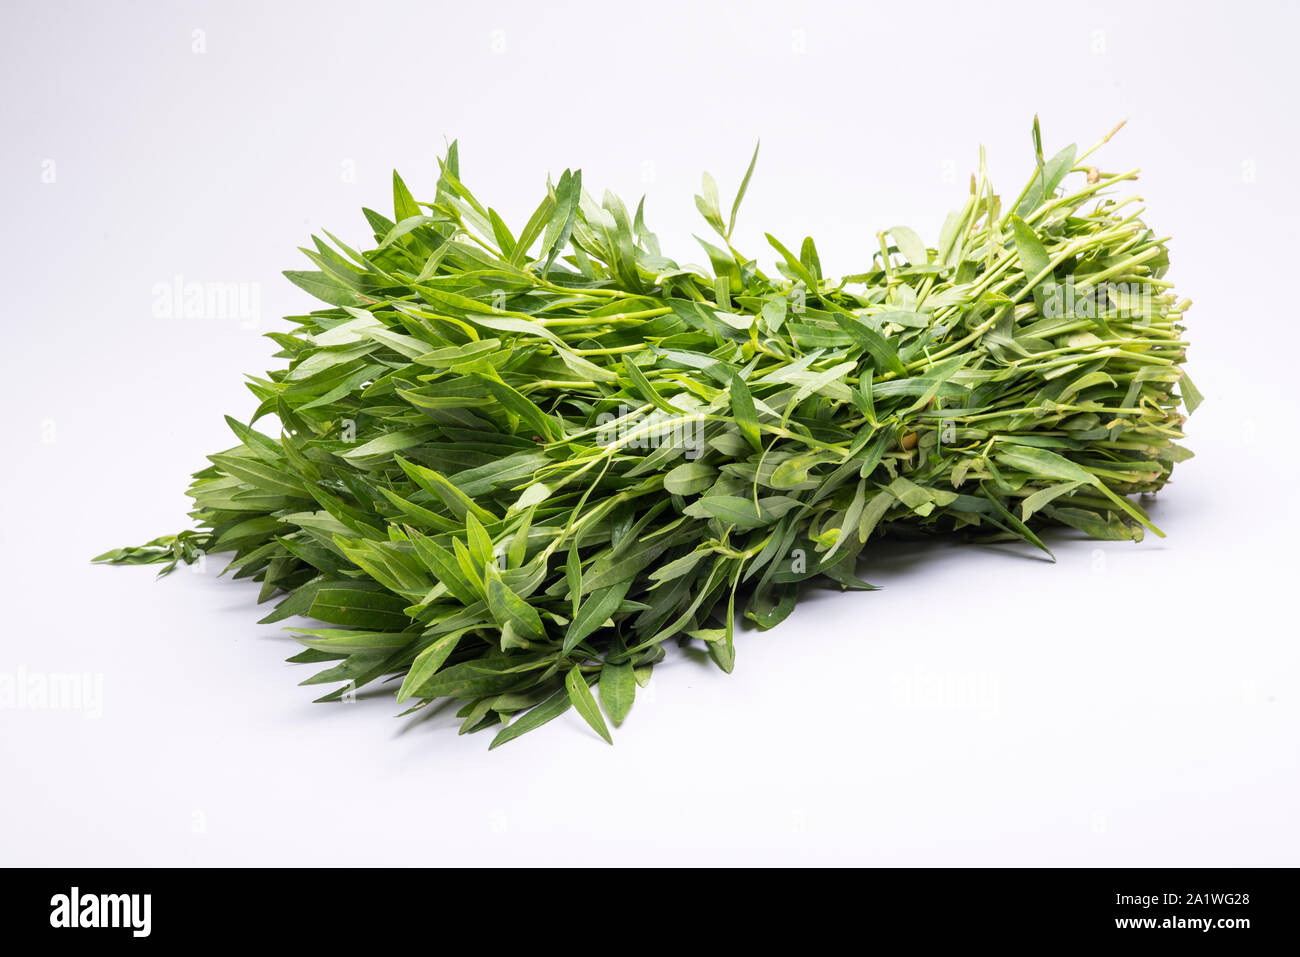 A bunch of Alternanthera sessilis, an aquatic plant used as a vegetable in Asian countries. Stock Photo